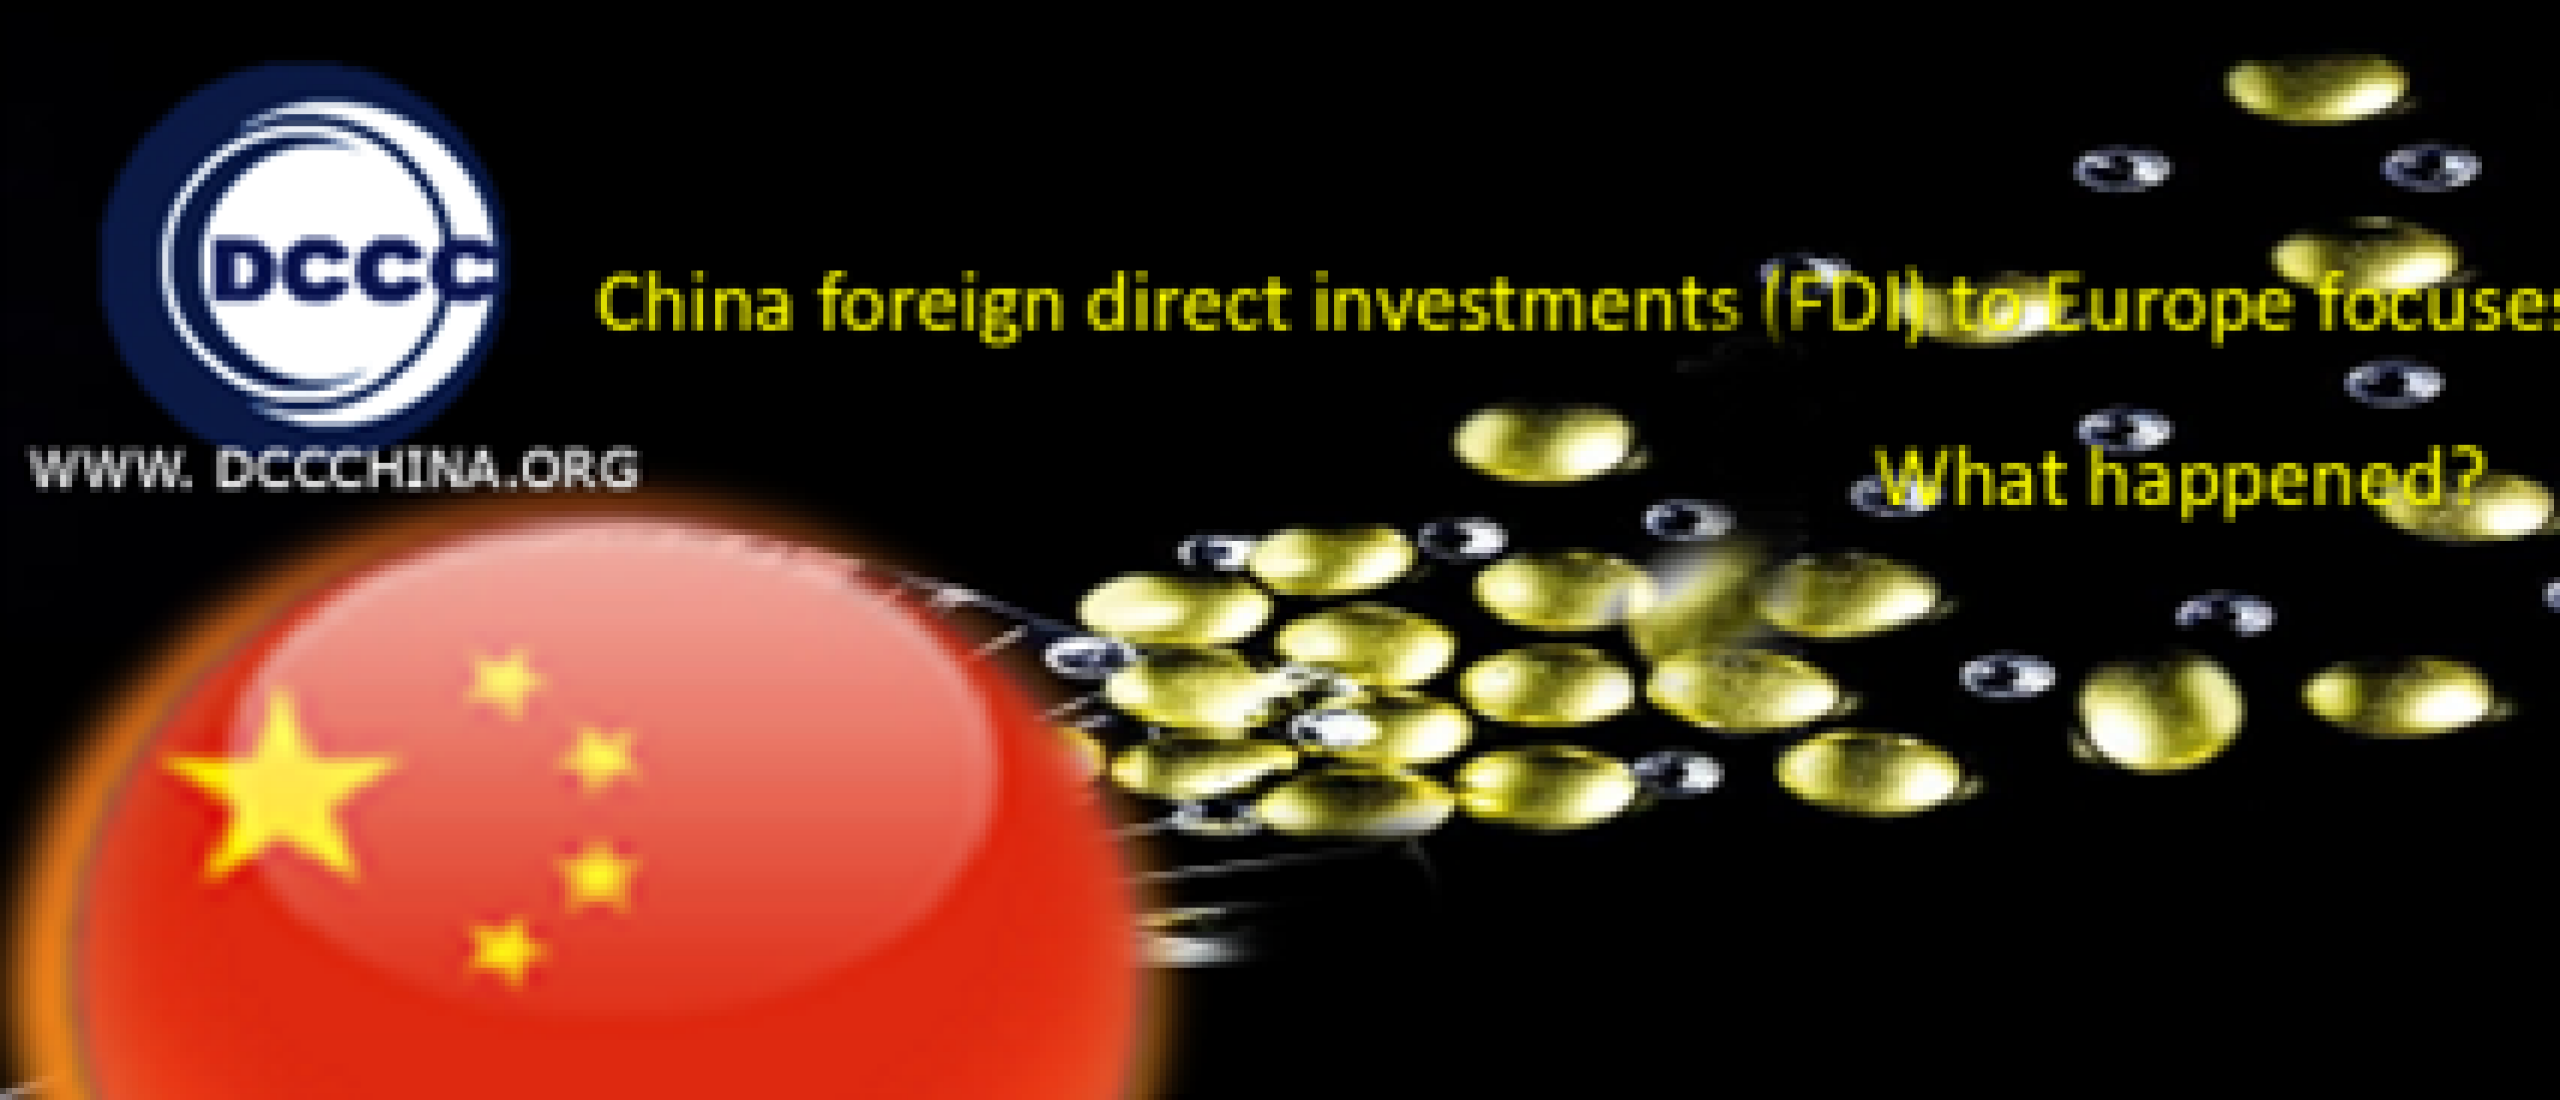 Changing situation of Chinese FDI flows to Europe